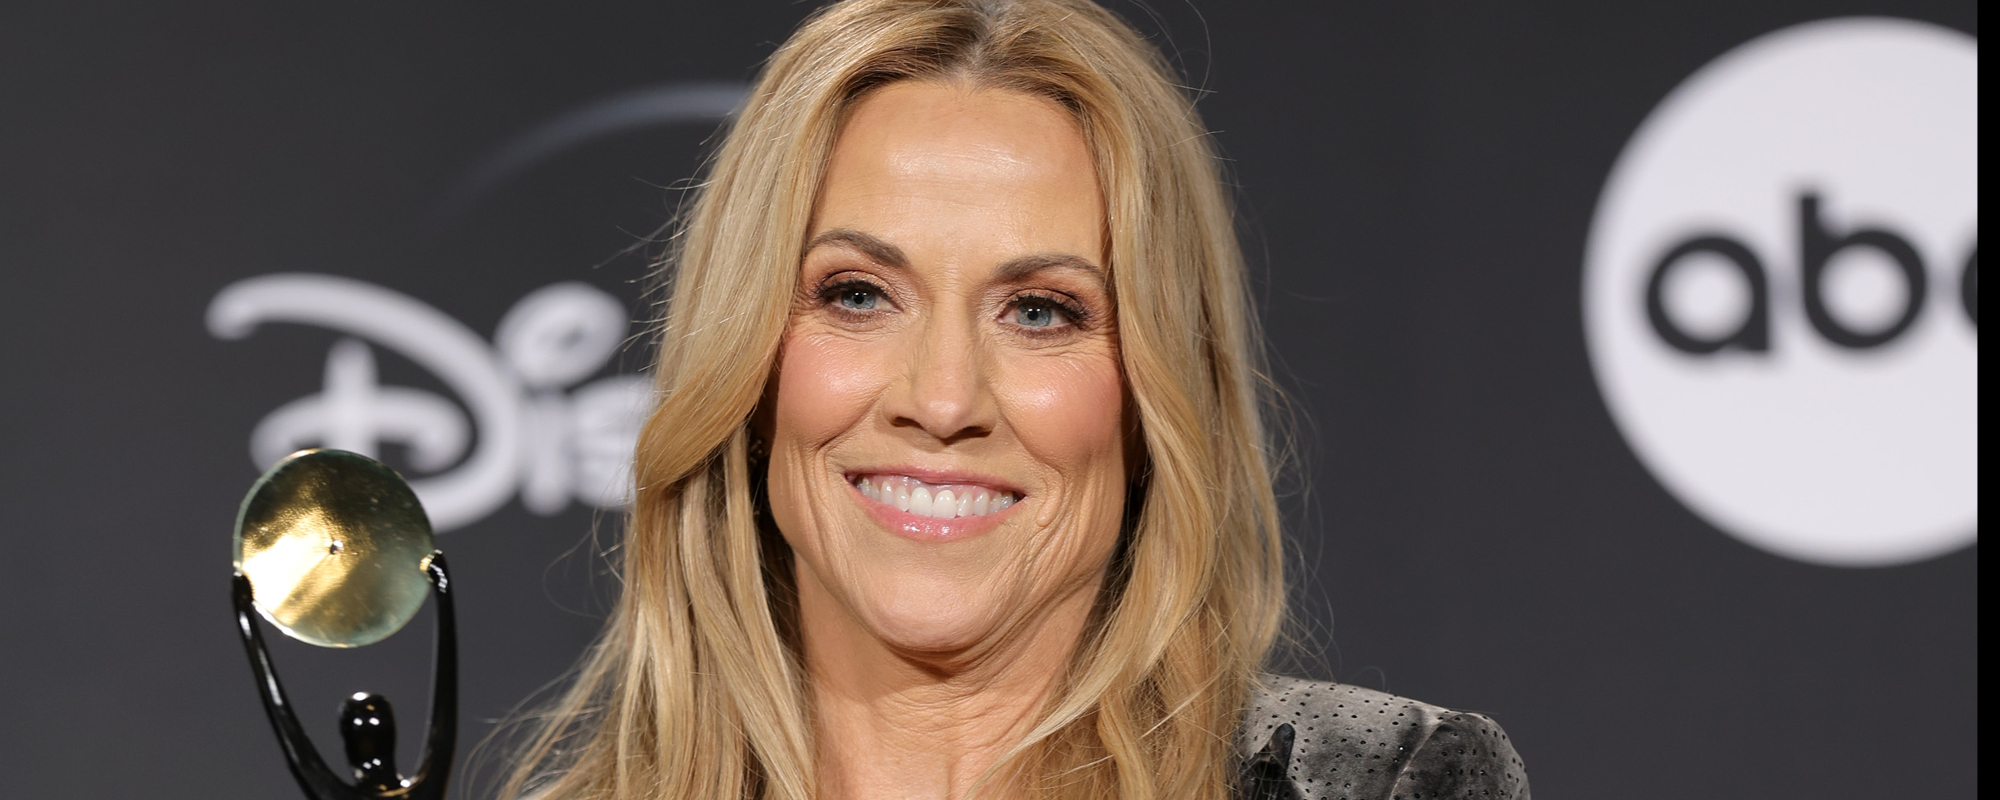 Sheryl Crow Shares Her Disdain for AI in New Song “Evolution”